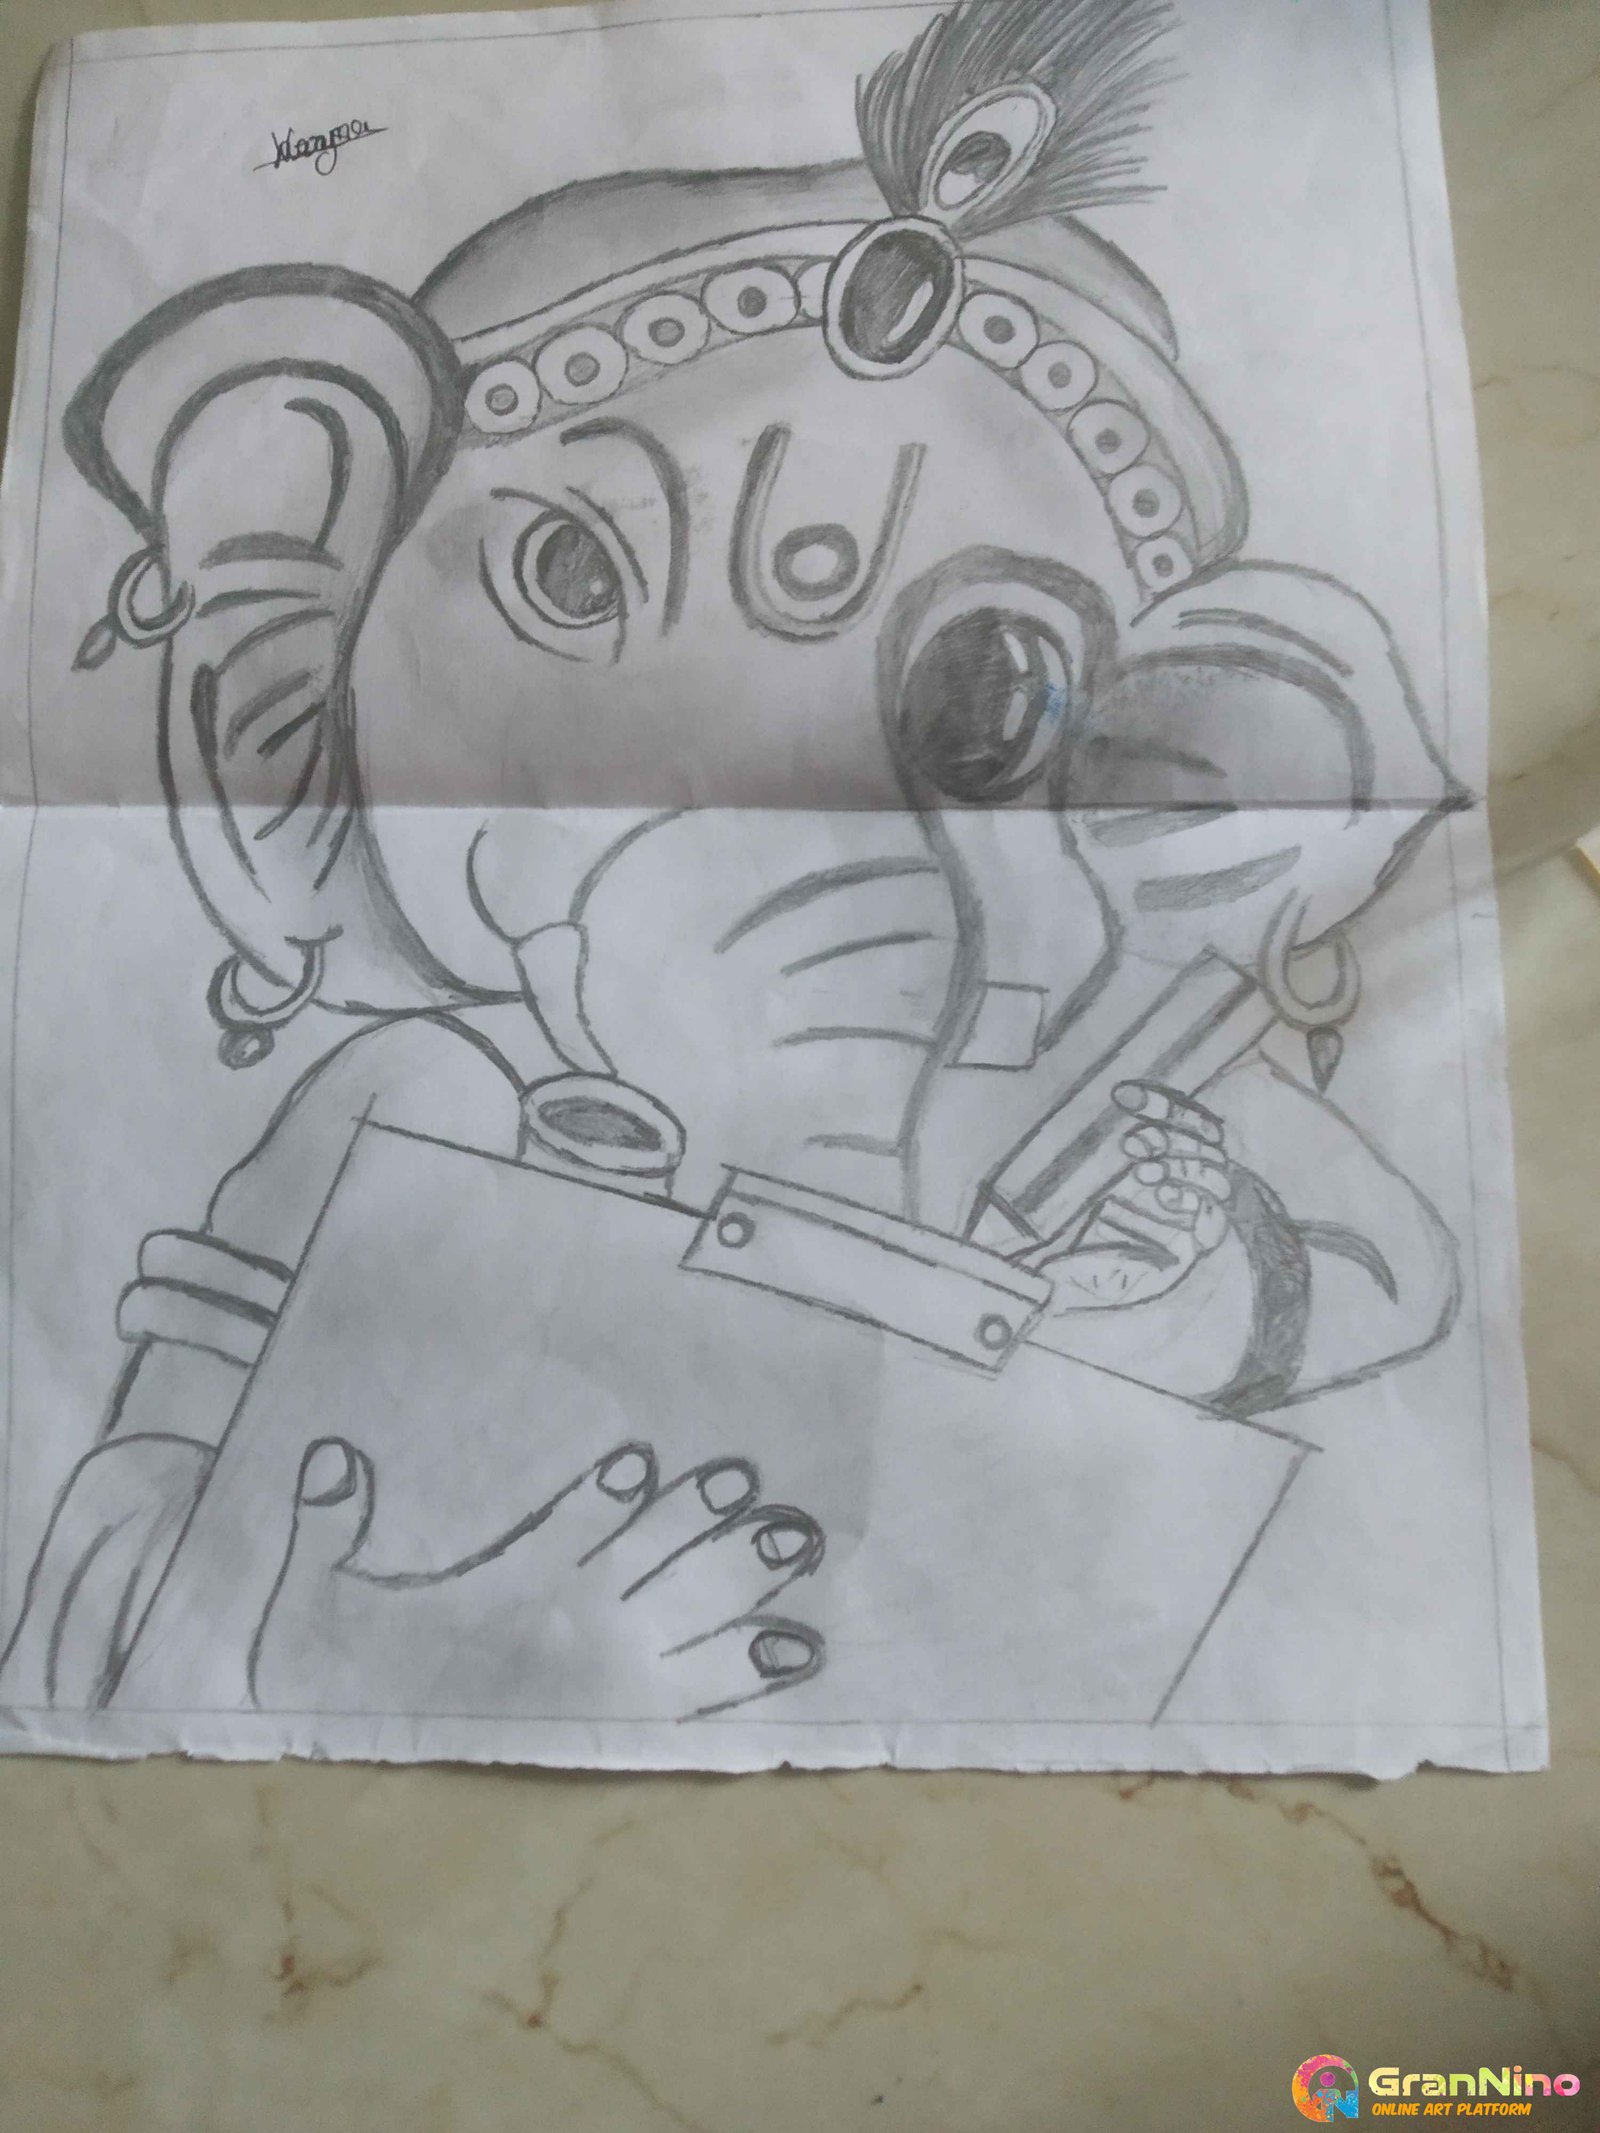 1527 Ganesh Chaturthi Sketch Images Stock Photos  Vectors  Shutterstock